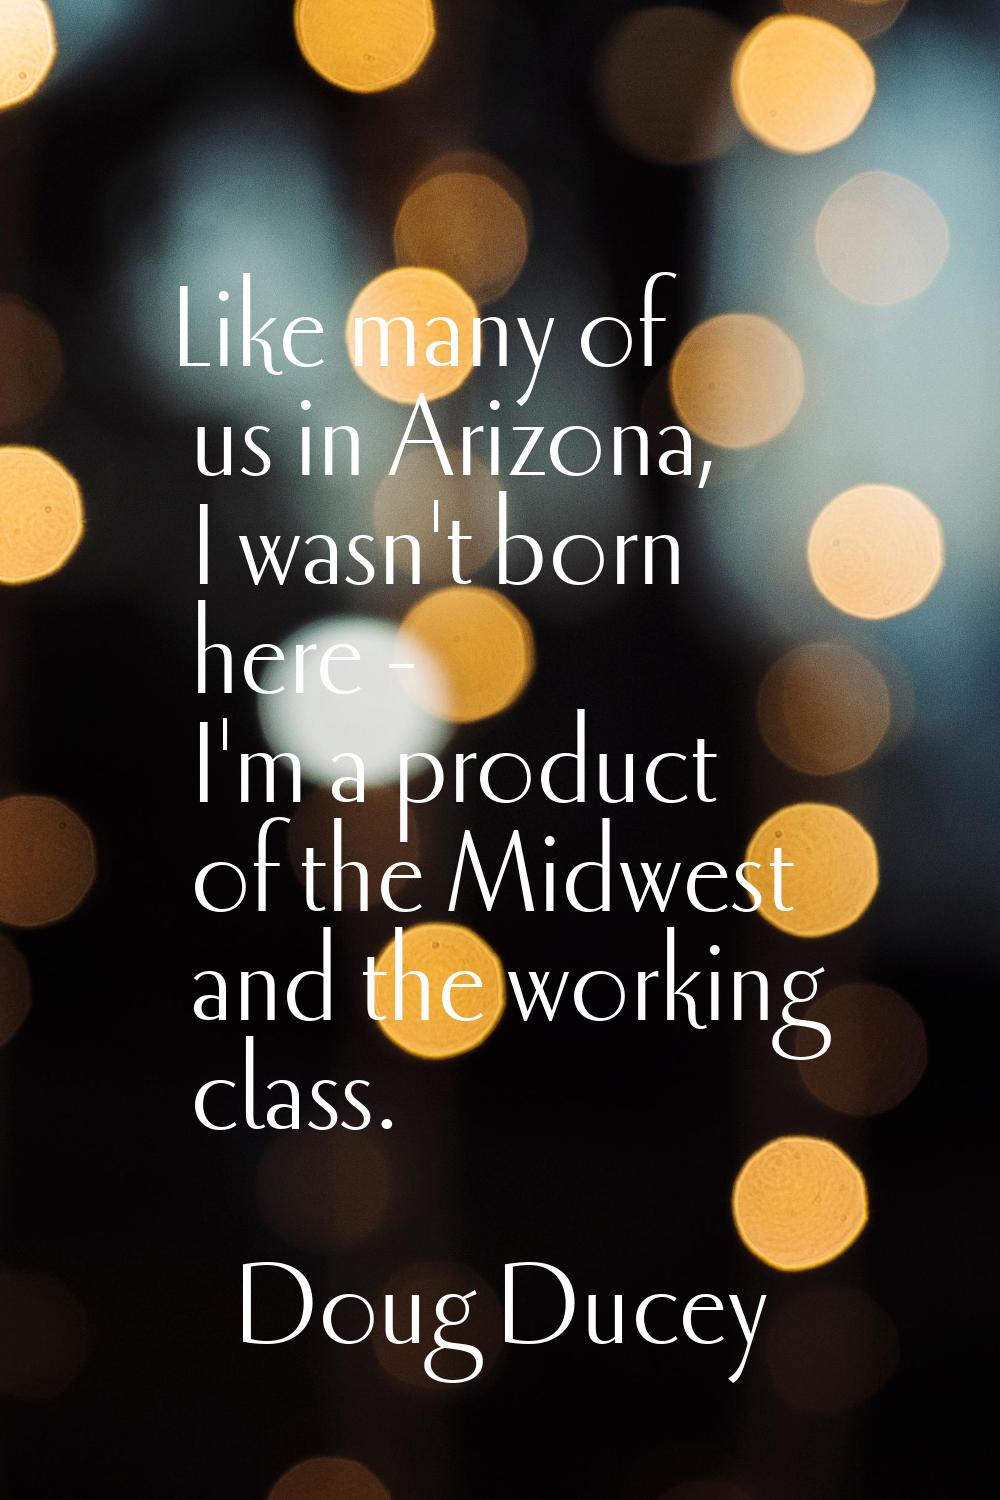 Like many of us in Arizona, I wasn't born here - I'm a product of the Midwest and the working class